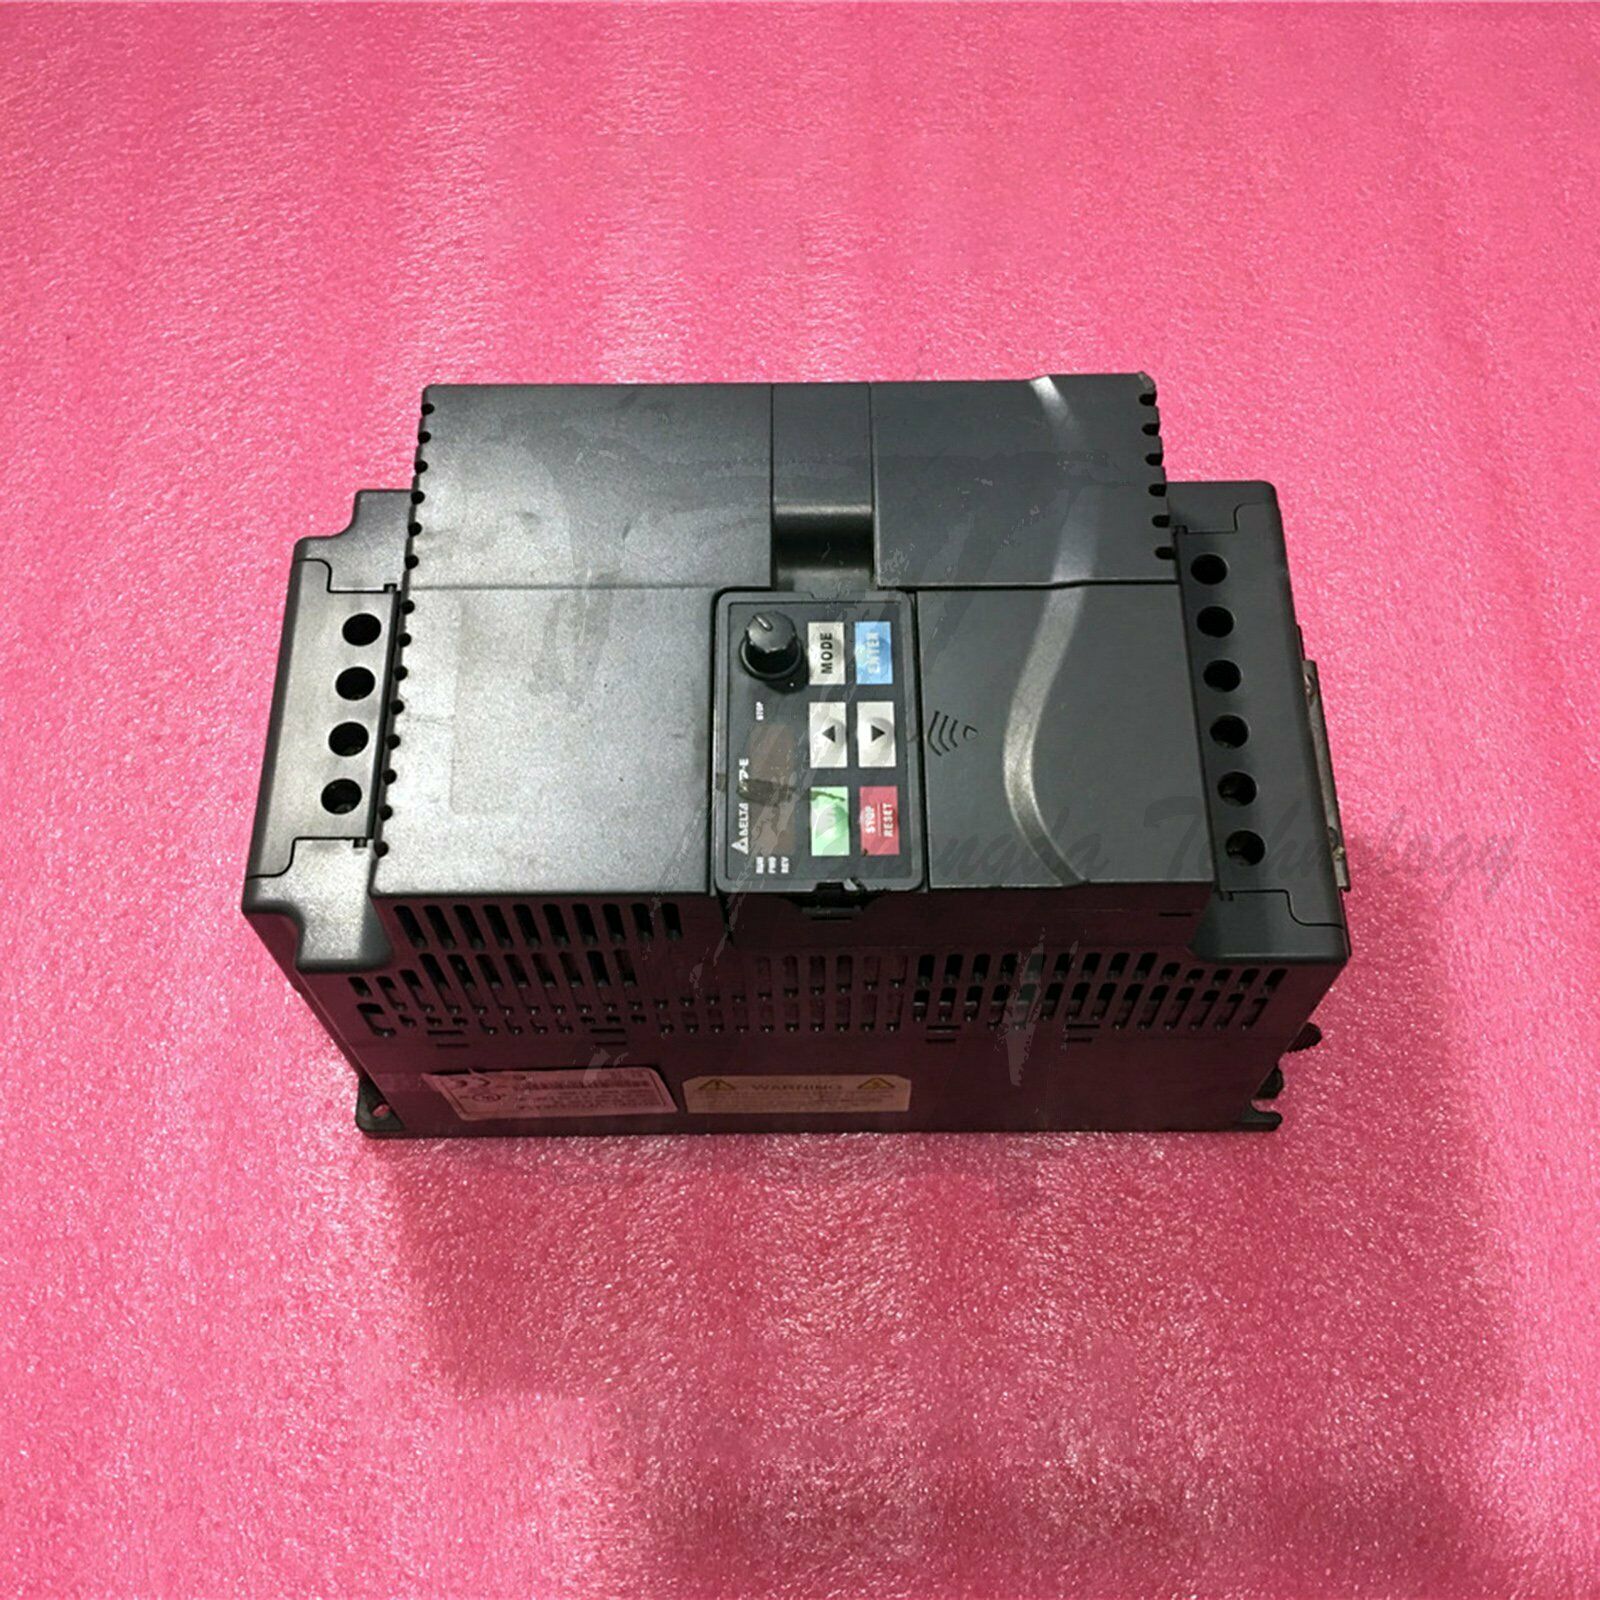 Used Delta VFD055E43A Inverter 5.5KW 380V Tested Tested It In Good Condition